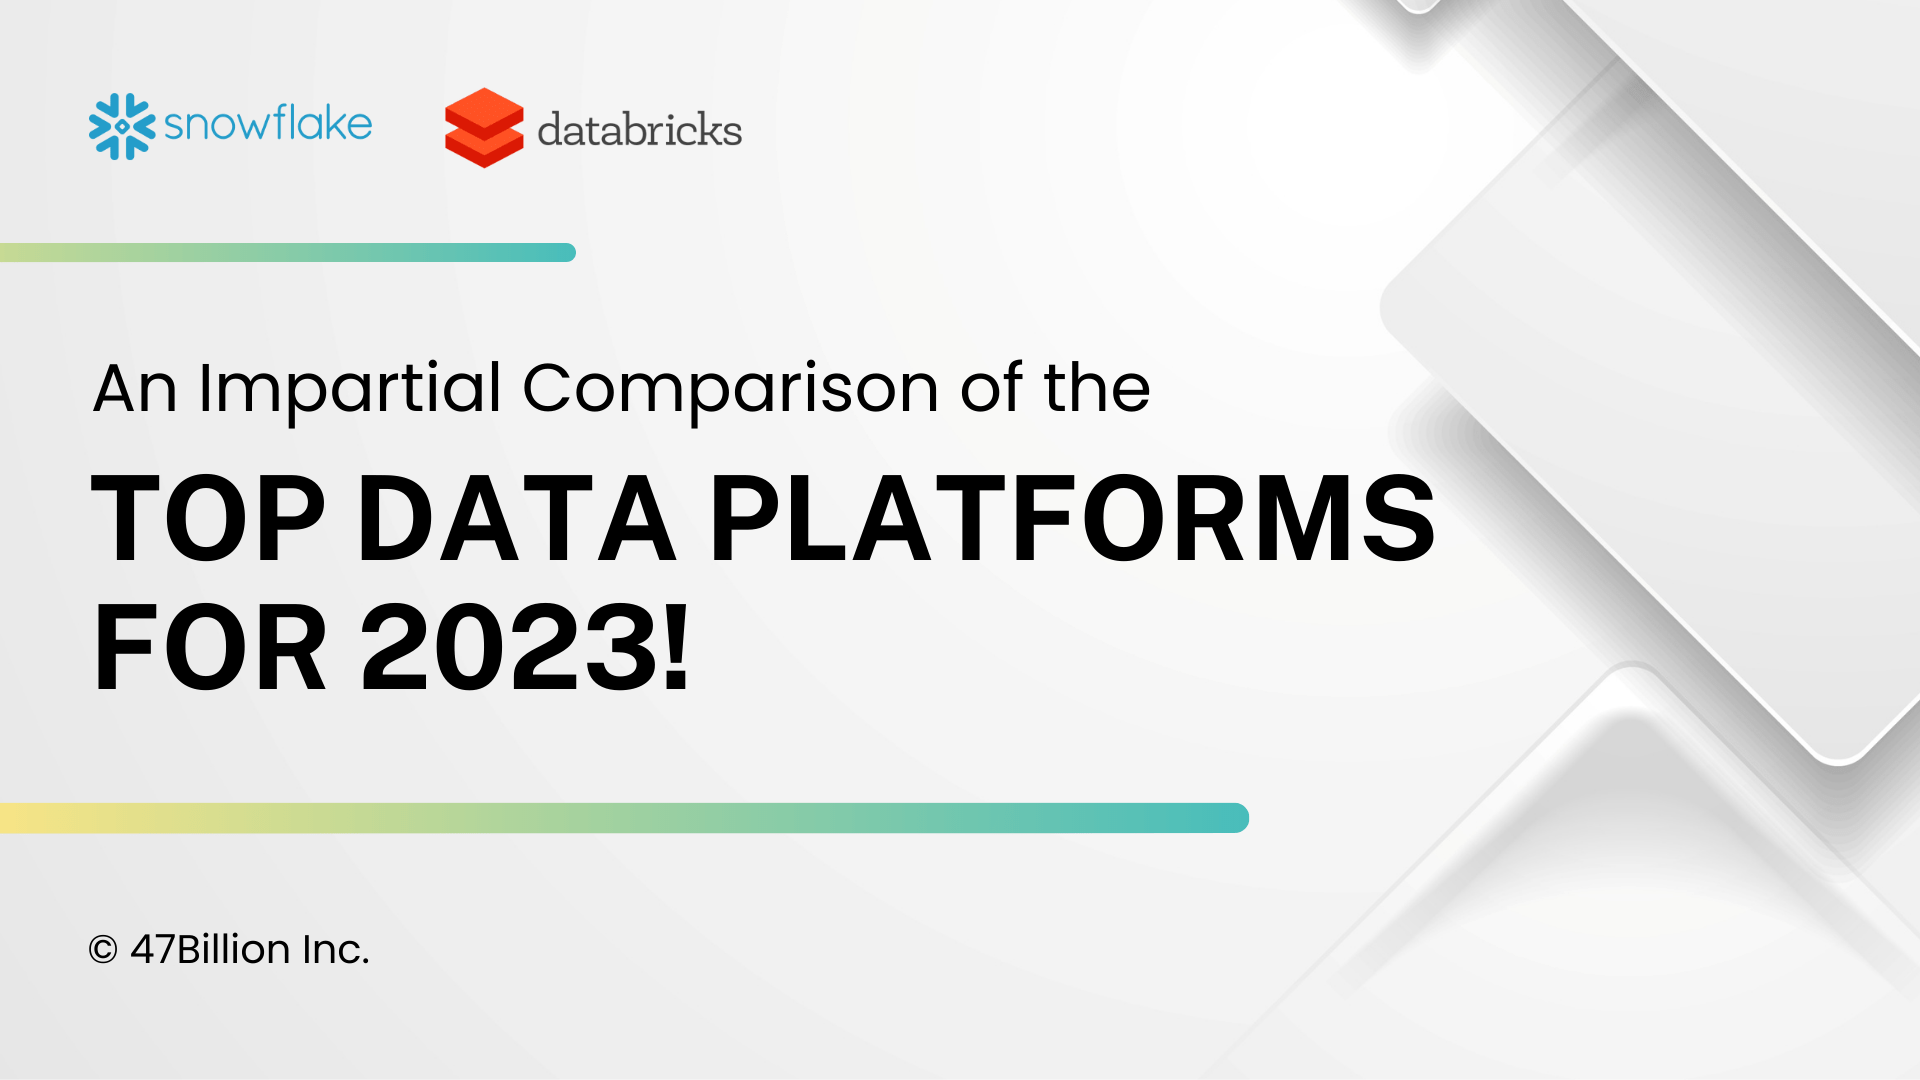 Databricks or Snowflake An Impartial Comparison of the Top Data Platforms for 2023